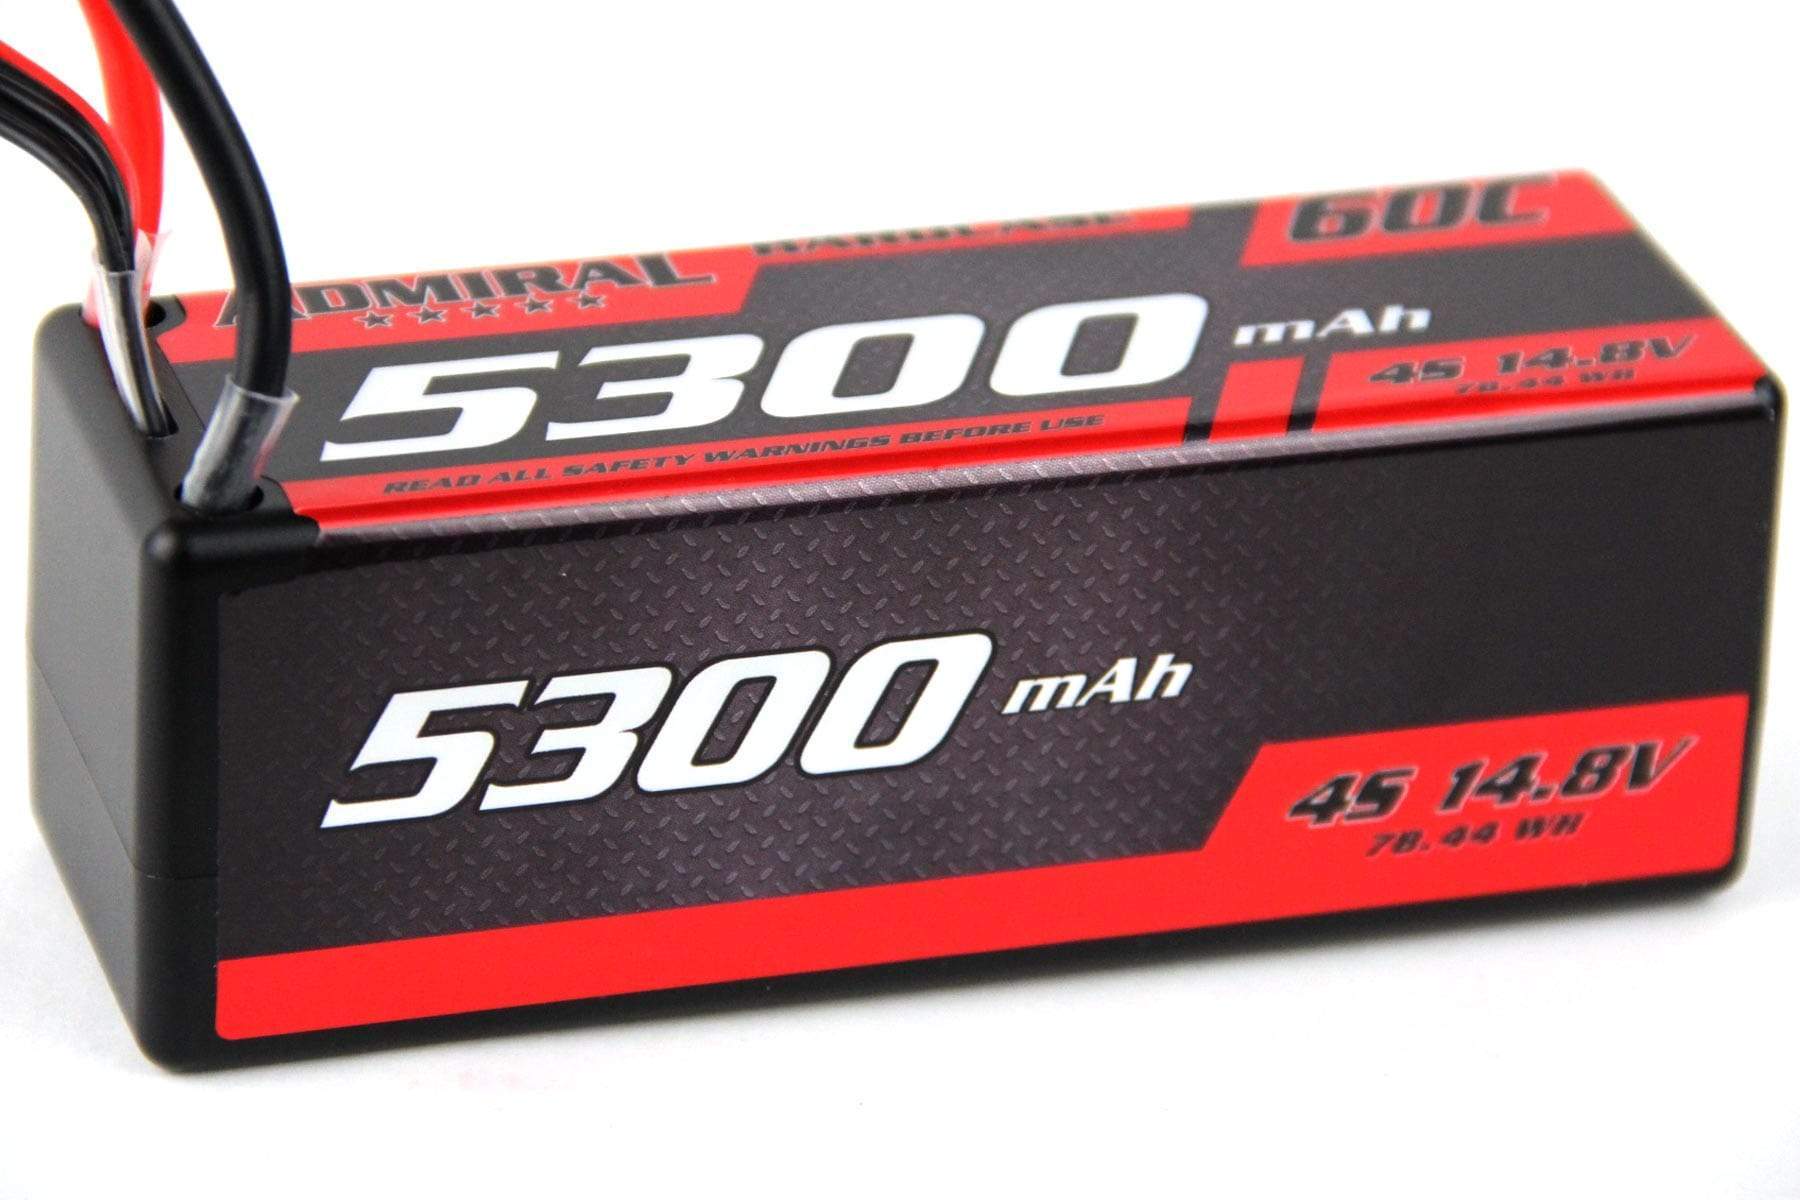 Admiral 5300mAh 4S 14.8V 60C Hard Case LiPo Battery with T Connector EPR53004